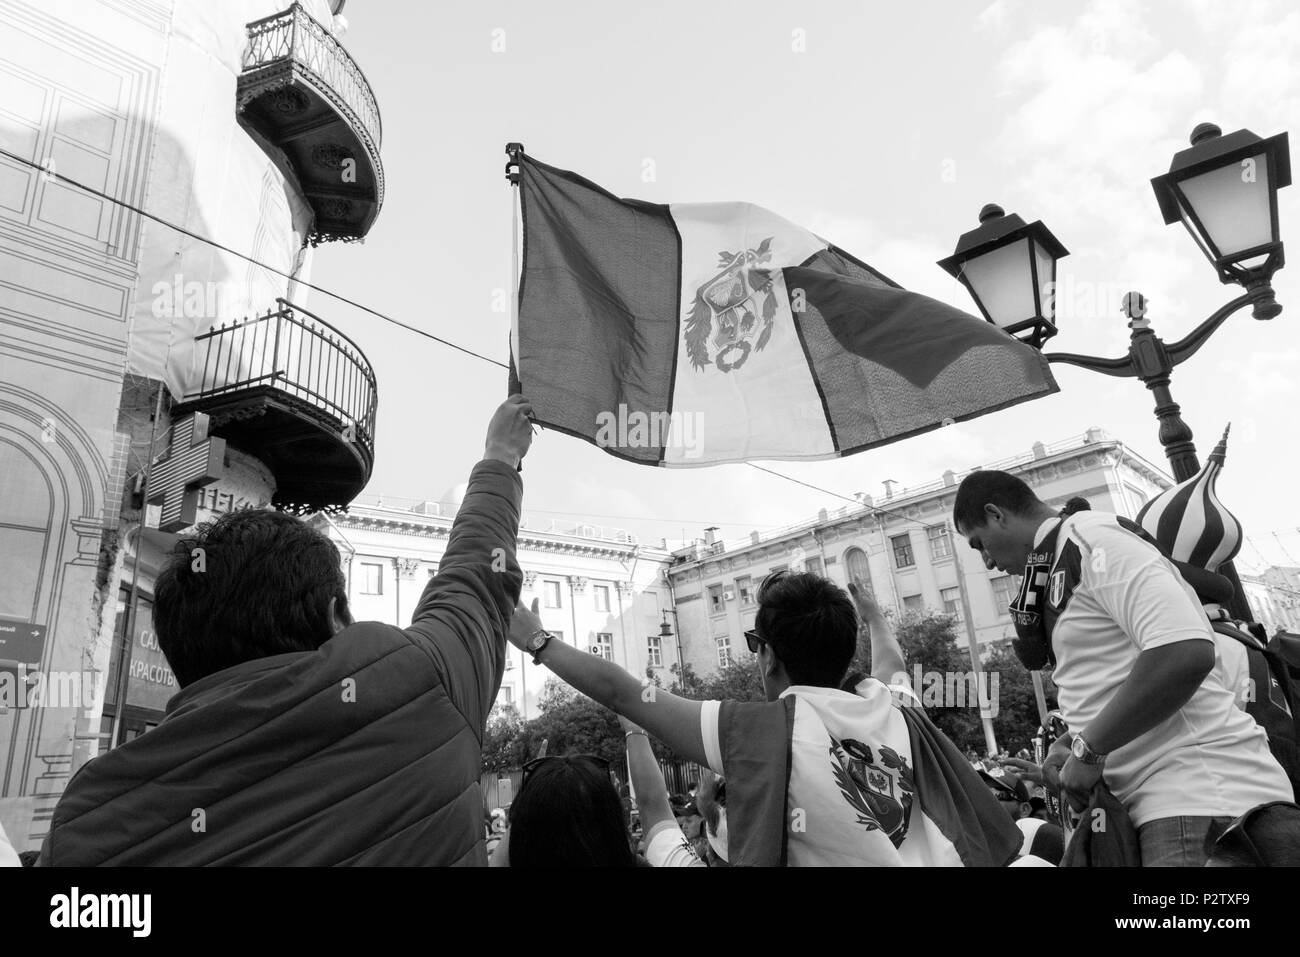 MOSCOW, RUSSIA - 13 JUNE, 2018: Black and white picture of peruvian supporters partying in the streets of Moscow for the World Cup, Russia Stock Photo